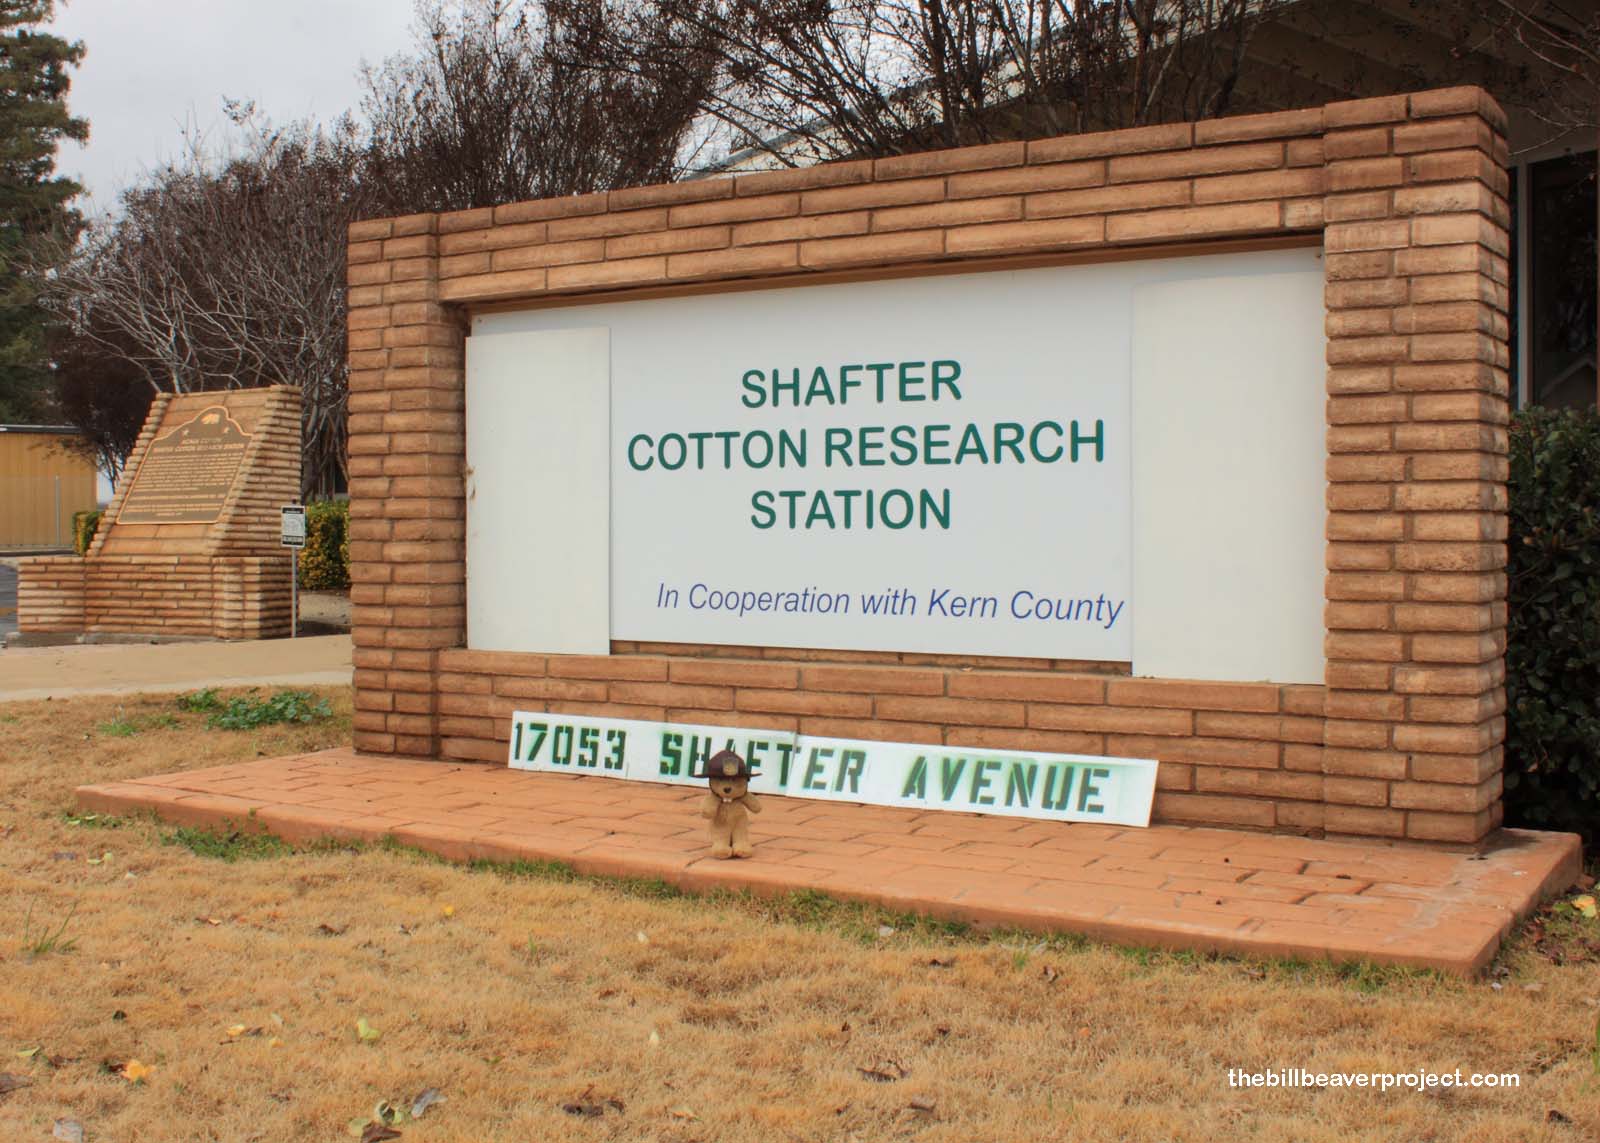 Shafter Cotton Research Station